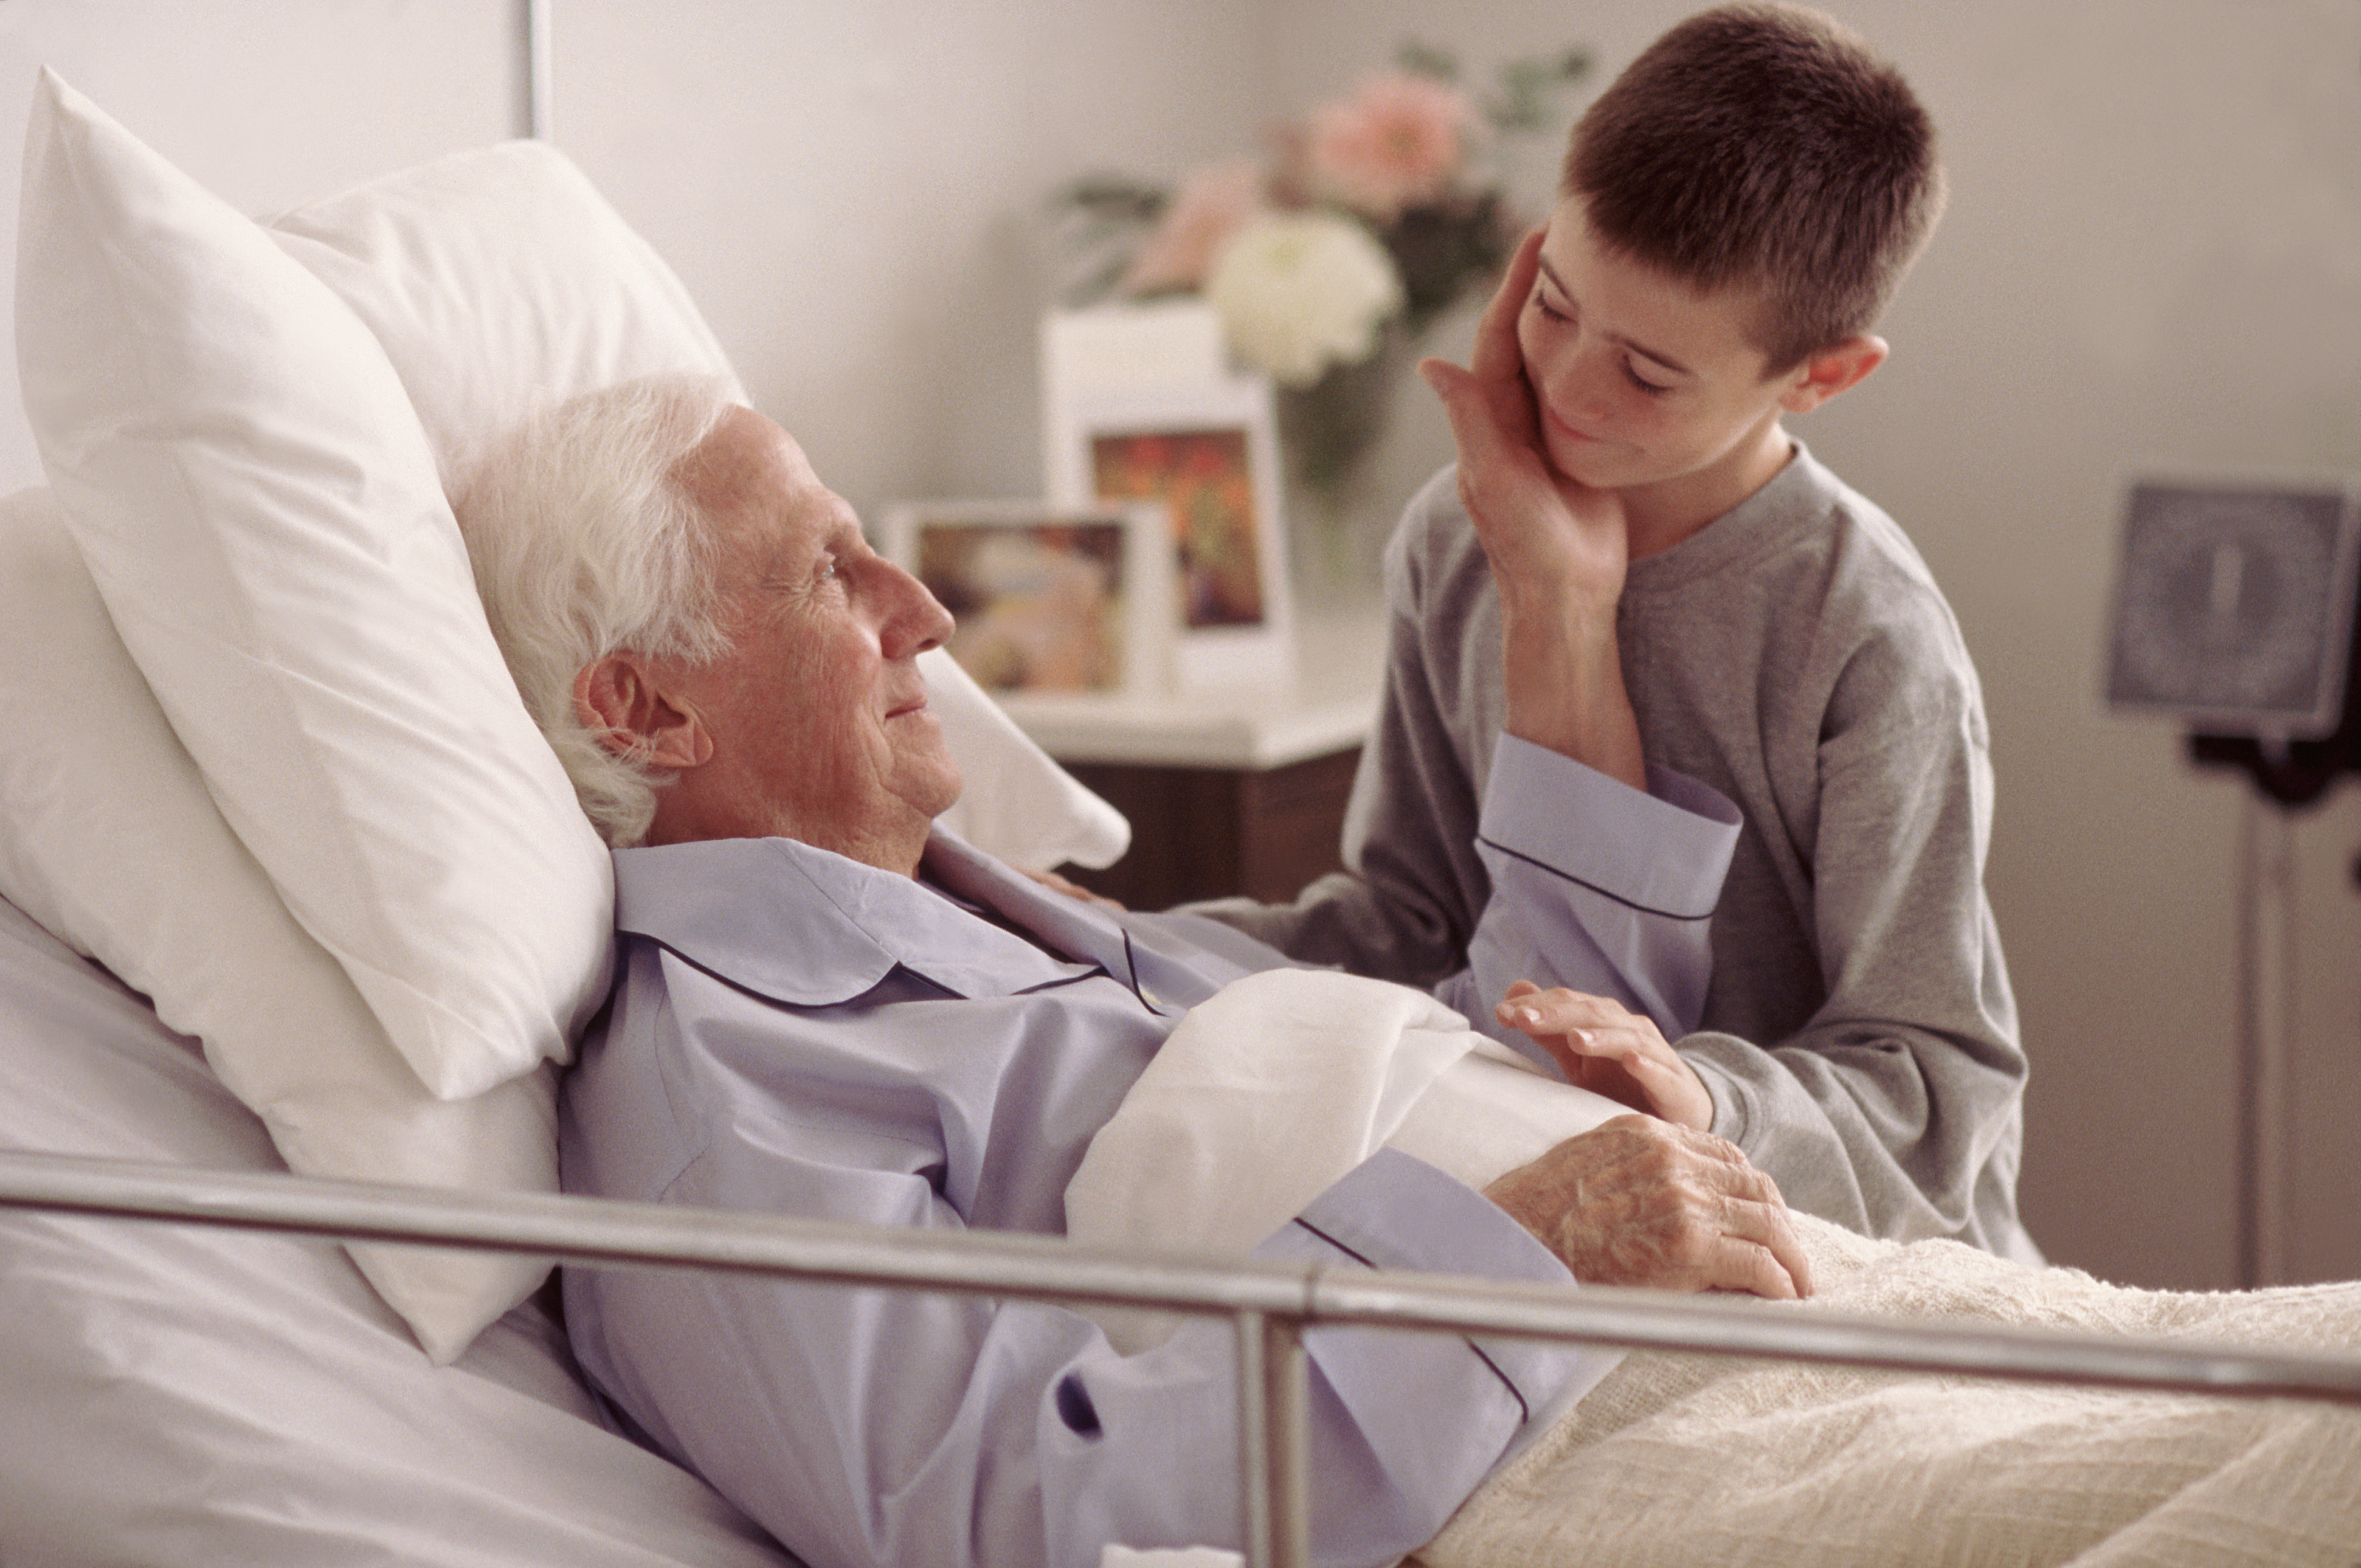 Grandson visiting Grandfather in hospital | Source: Getty Images